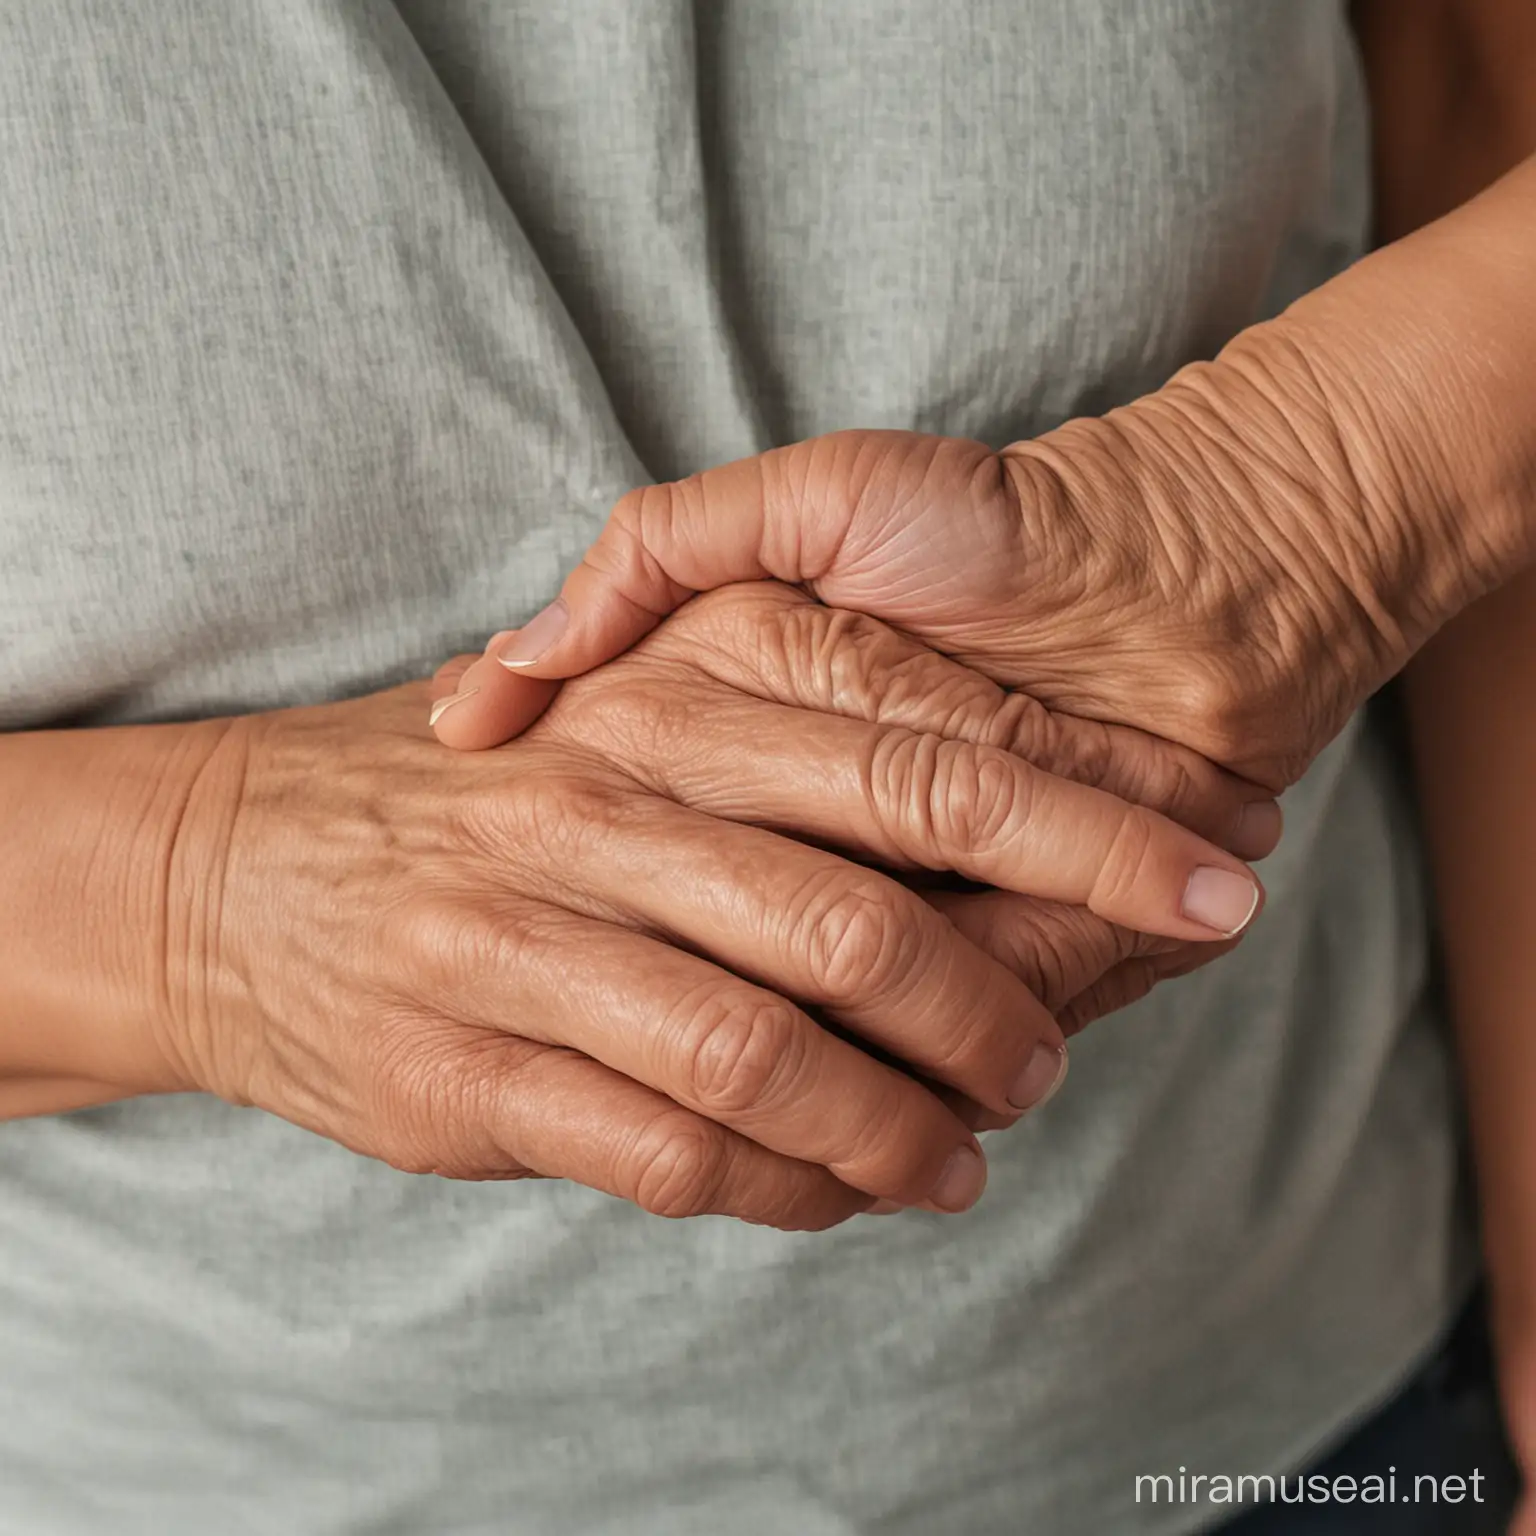 A picture of a boy holding his mother's wrinkled hands.